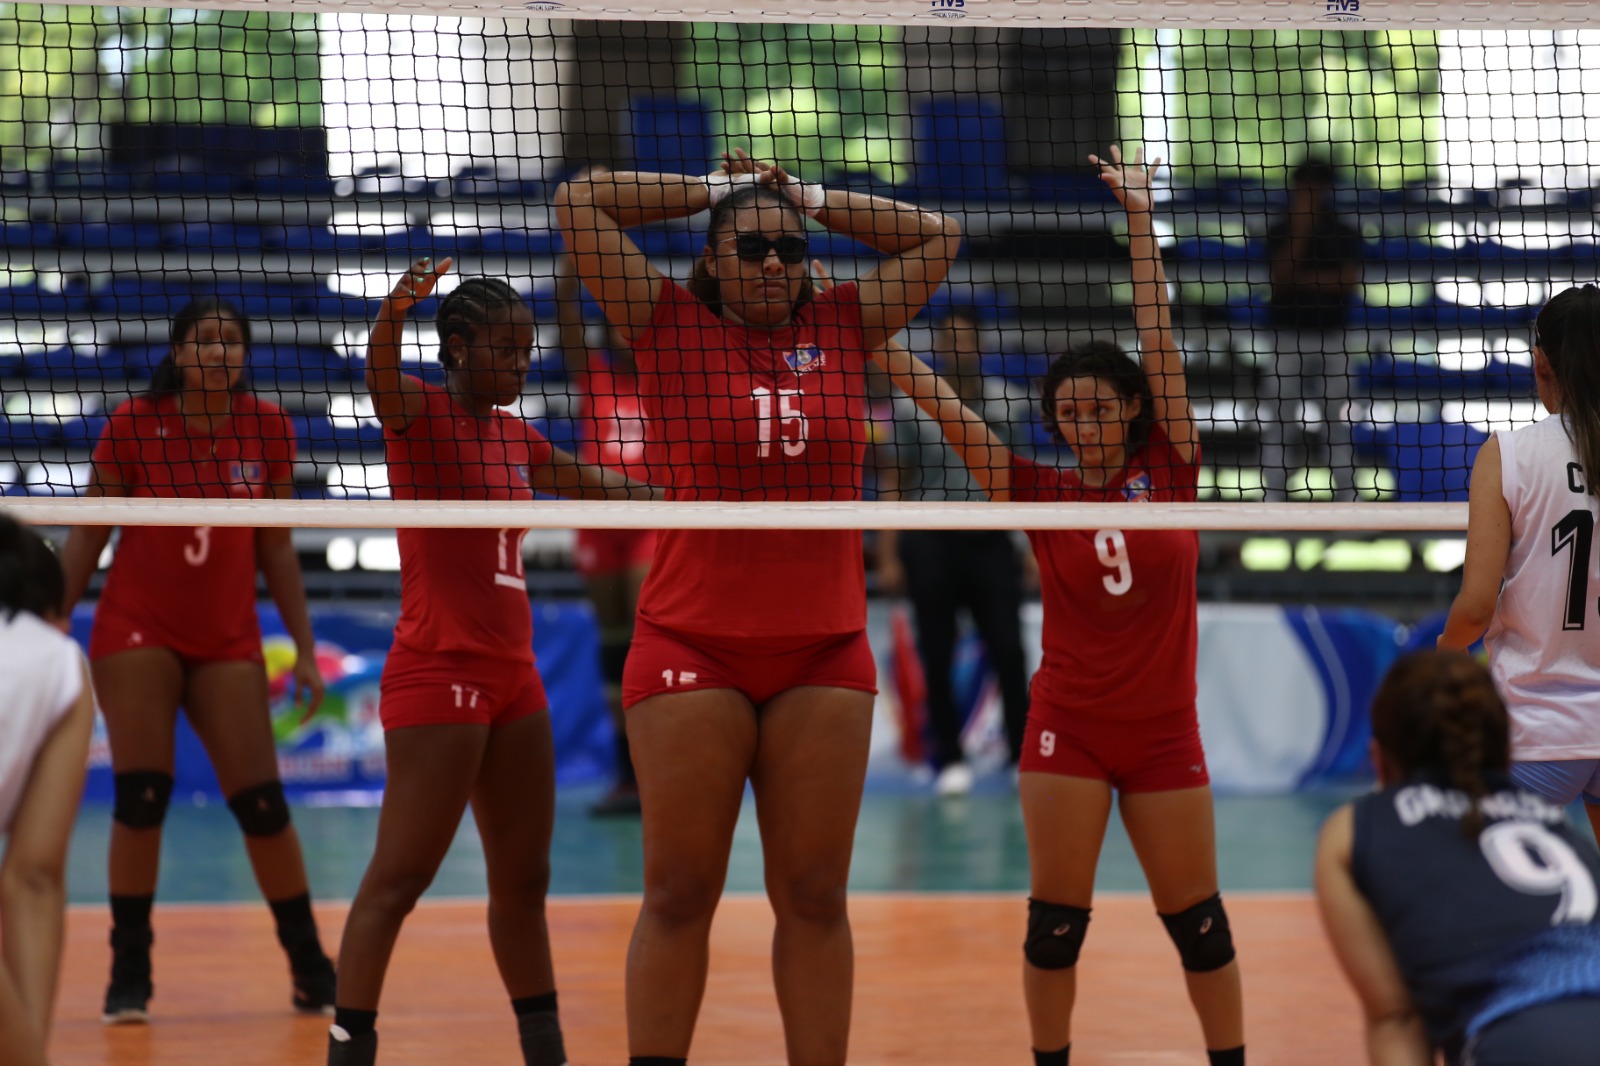 Kevanna Sebastian, vision problems don’t stop her from playing volleyball